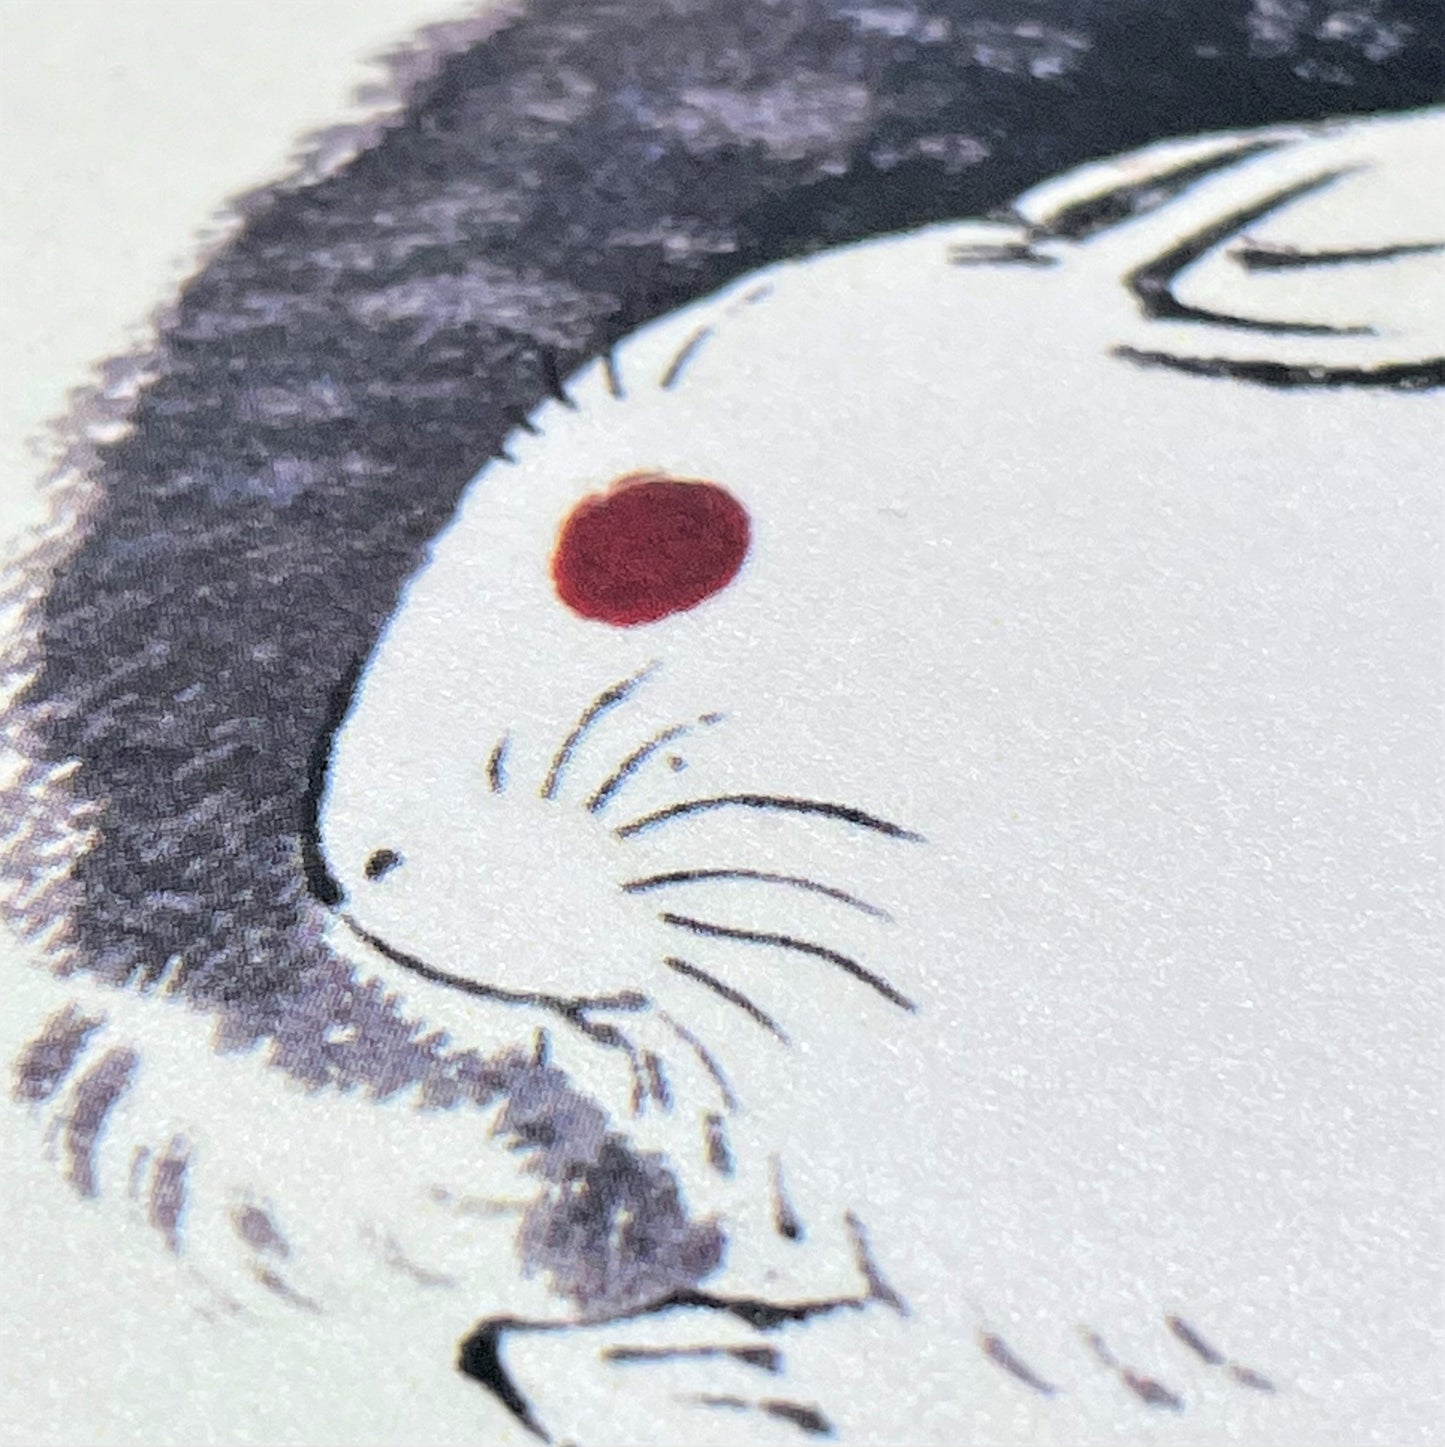 greetings card showing a drawing of one black rabbit and one white rabbit sitting together, close up of the rabbit